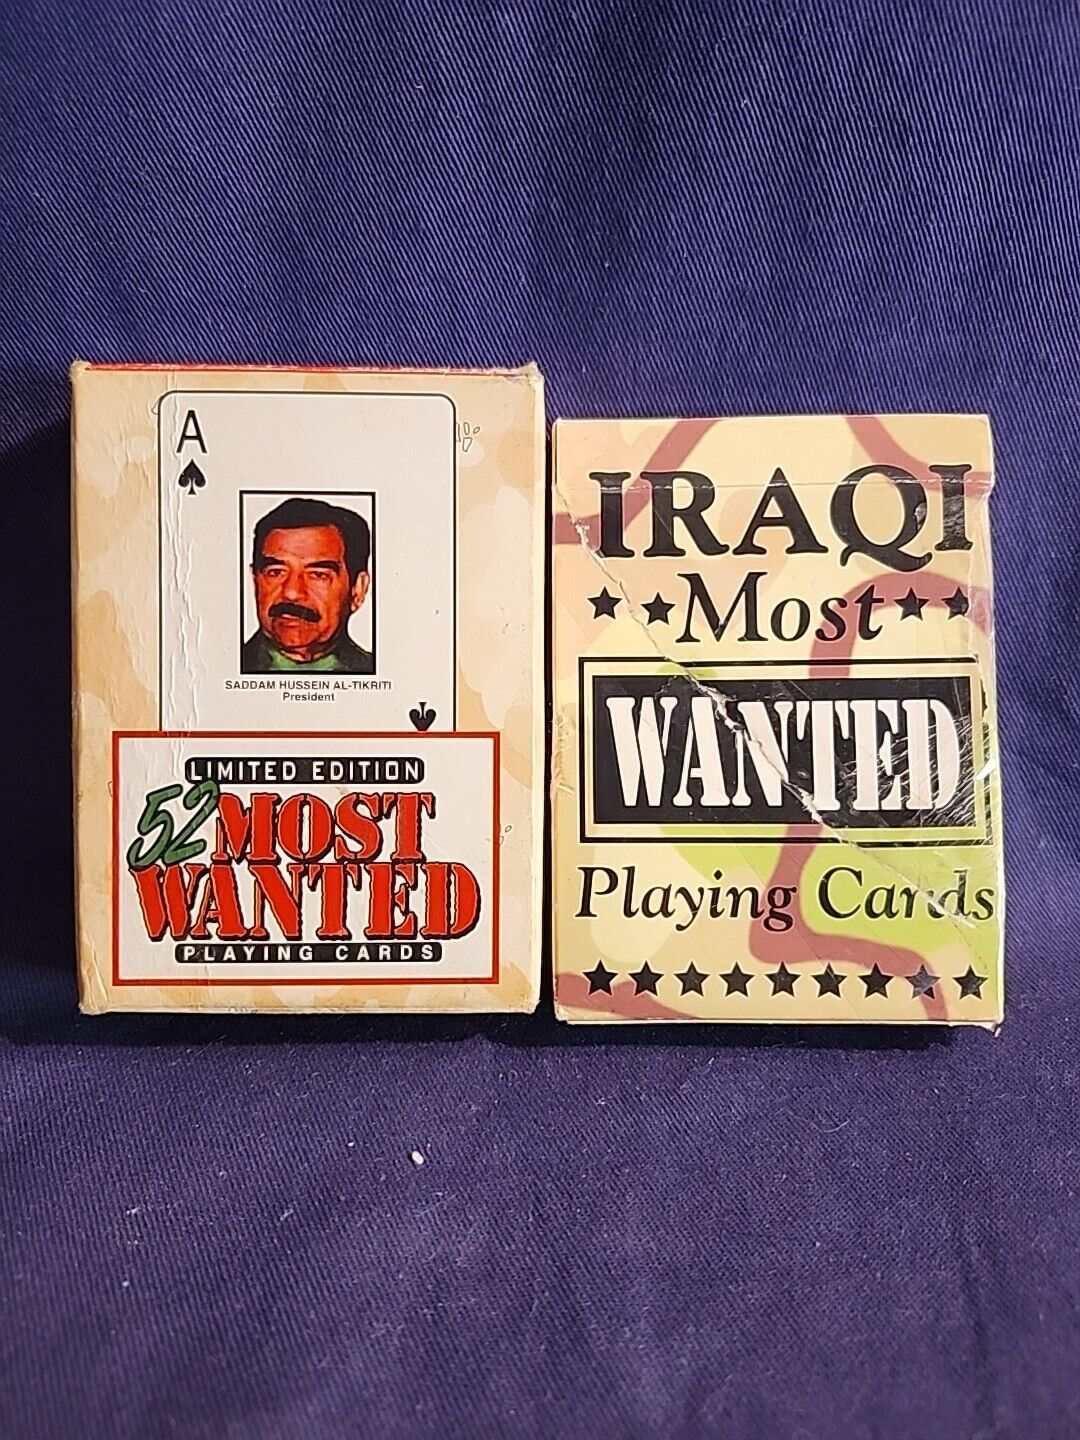 Iraqi Most Wanted Deck of 52 Playing Cards Lot of 2